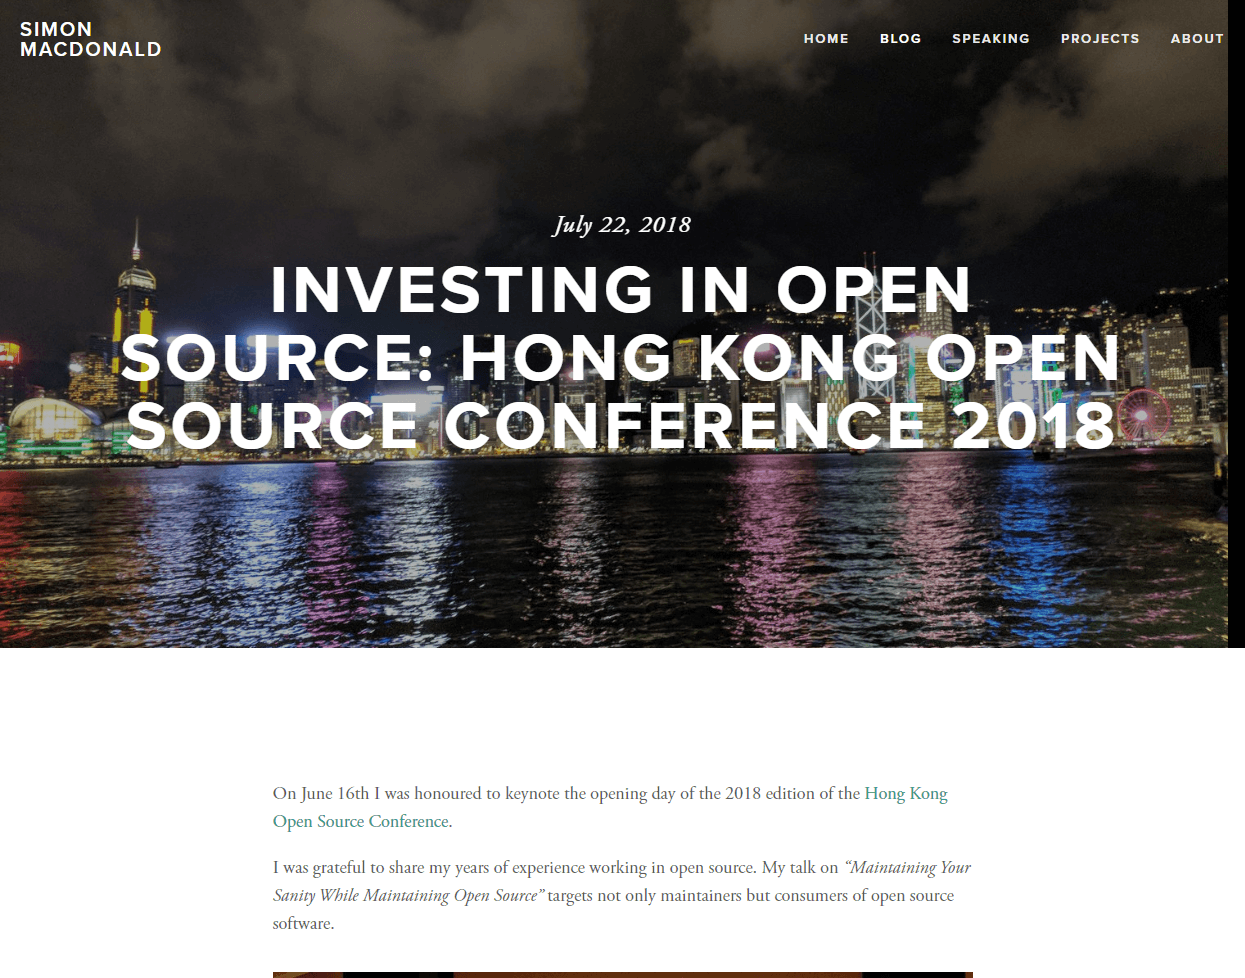 Investing in Open Source: Hong Kong Open Source Conference 2018